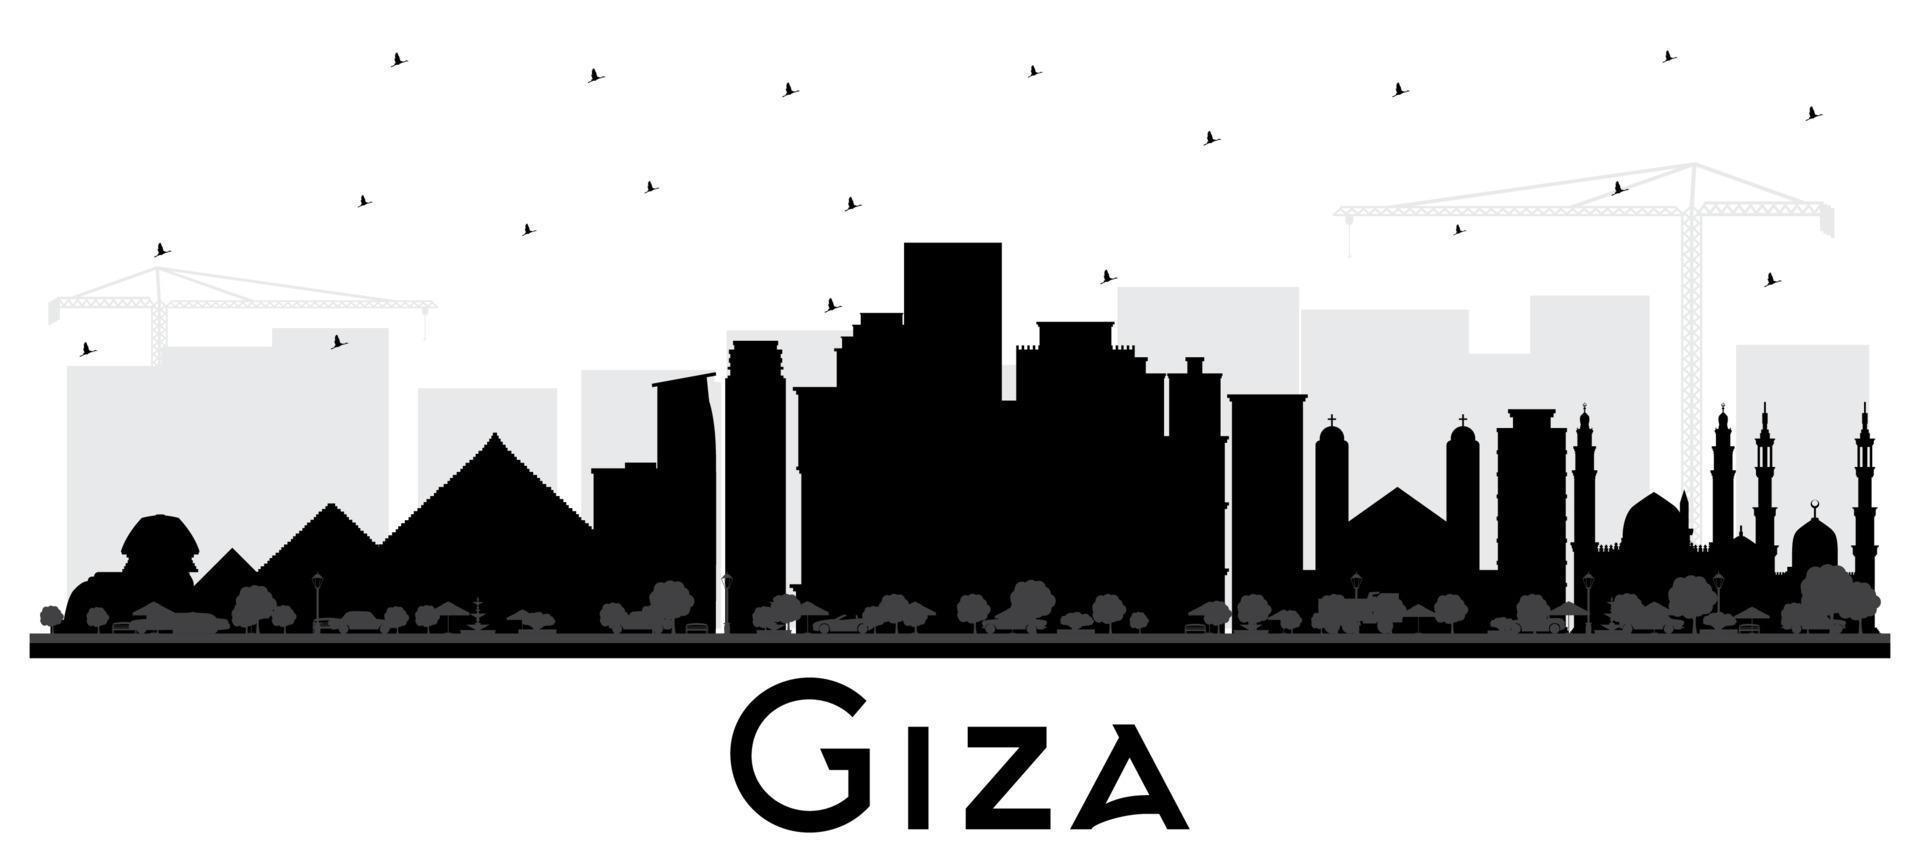 Giza Egypt City Skyline Silhouette with Black Buildings Isolated on White. vector